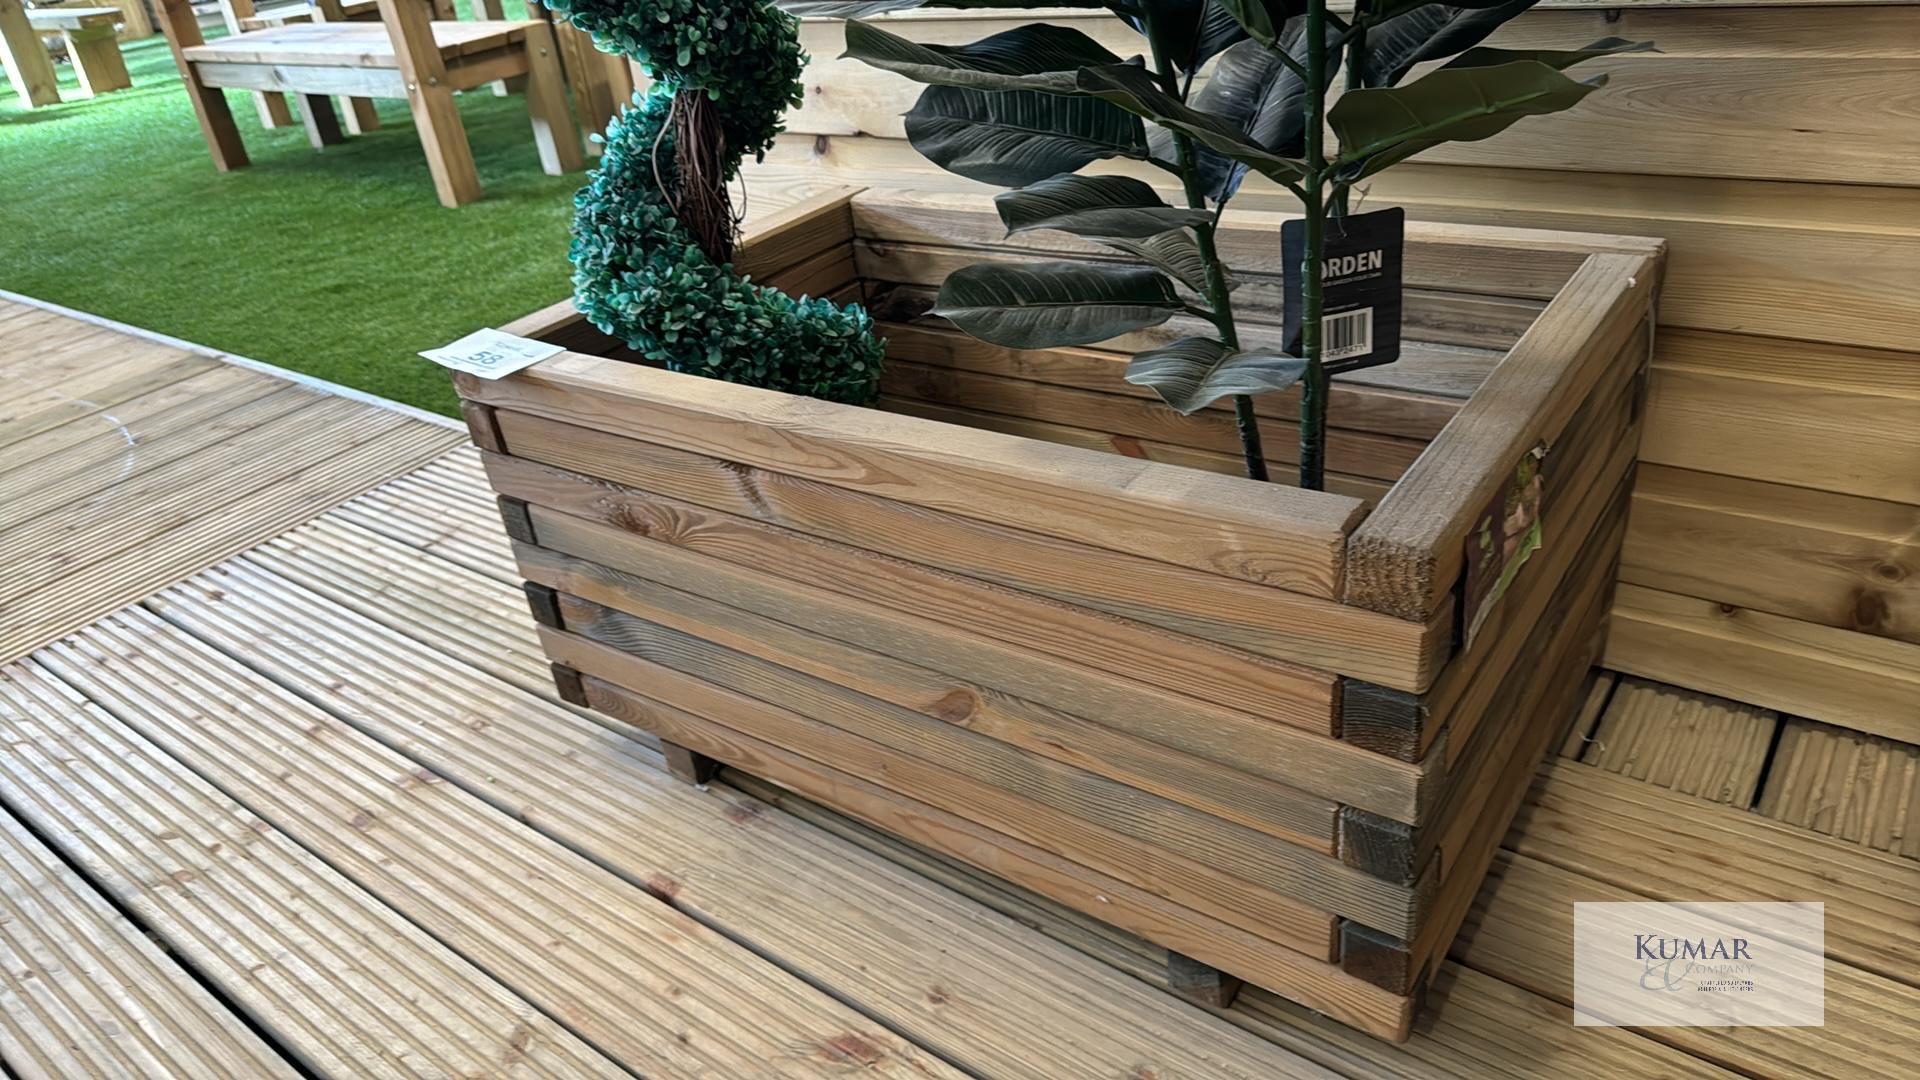 Gresell Single Planter, Sizes (W x D x H) 0.8m x 0.5m x 0.42m - Image 3 of 7